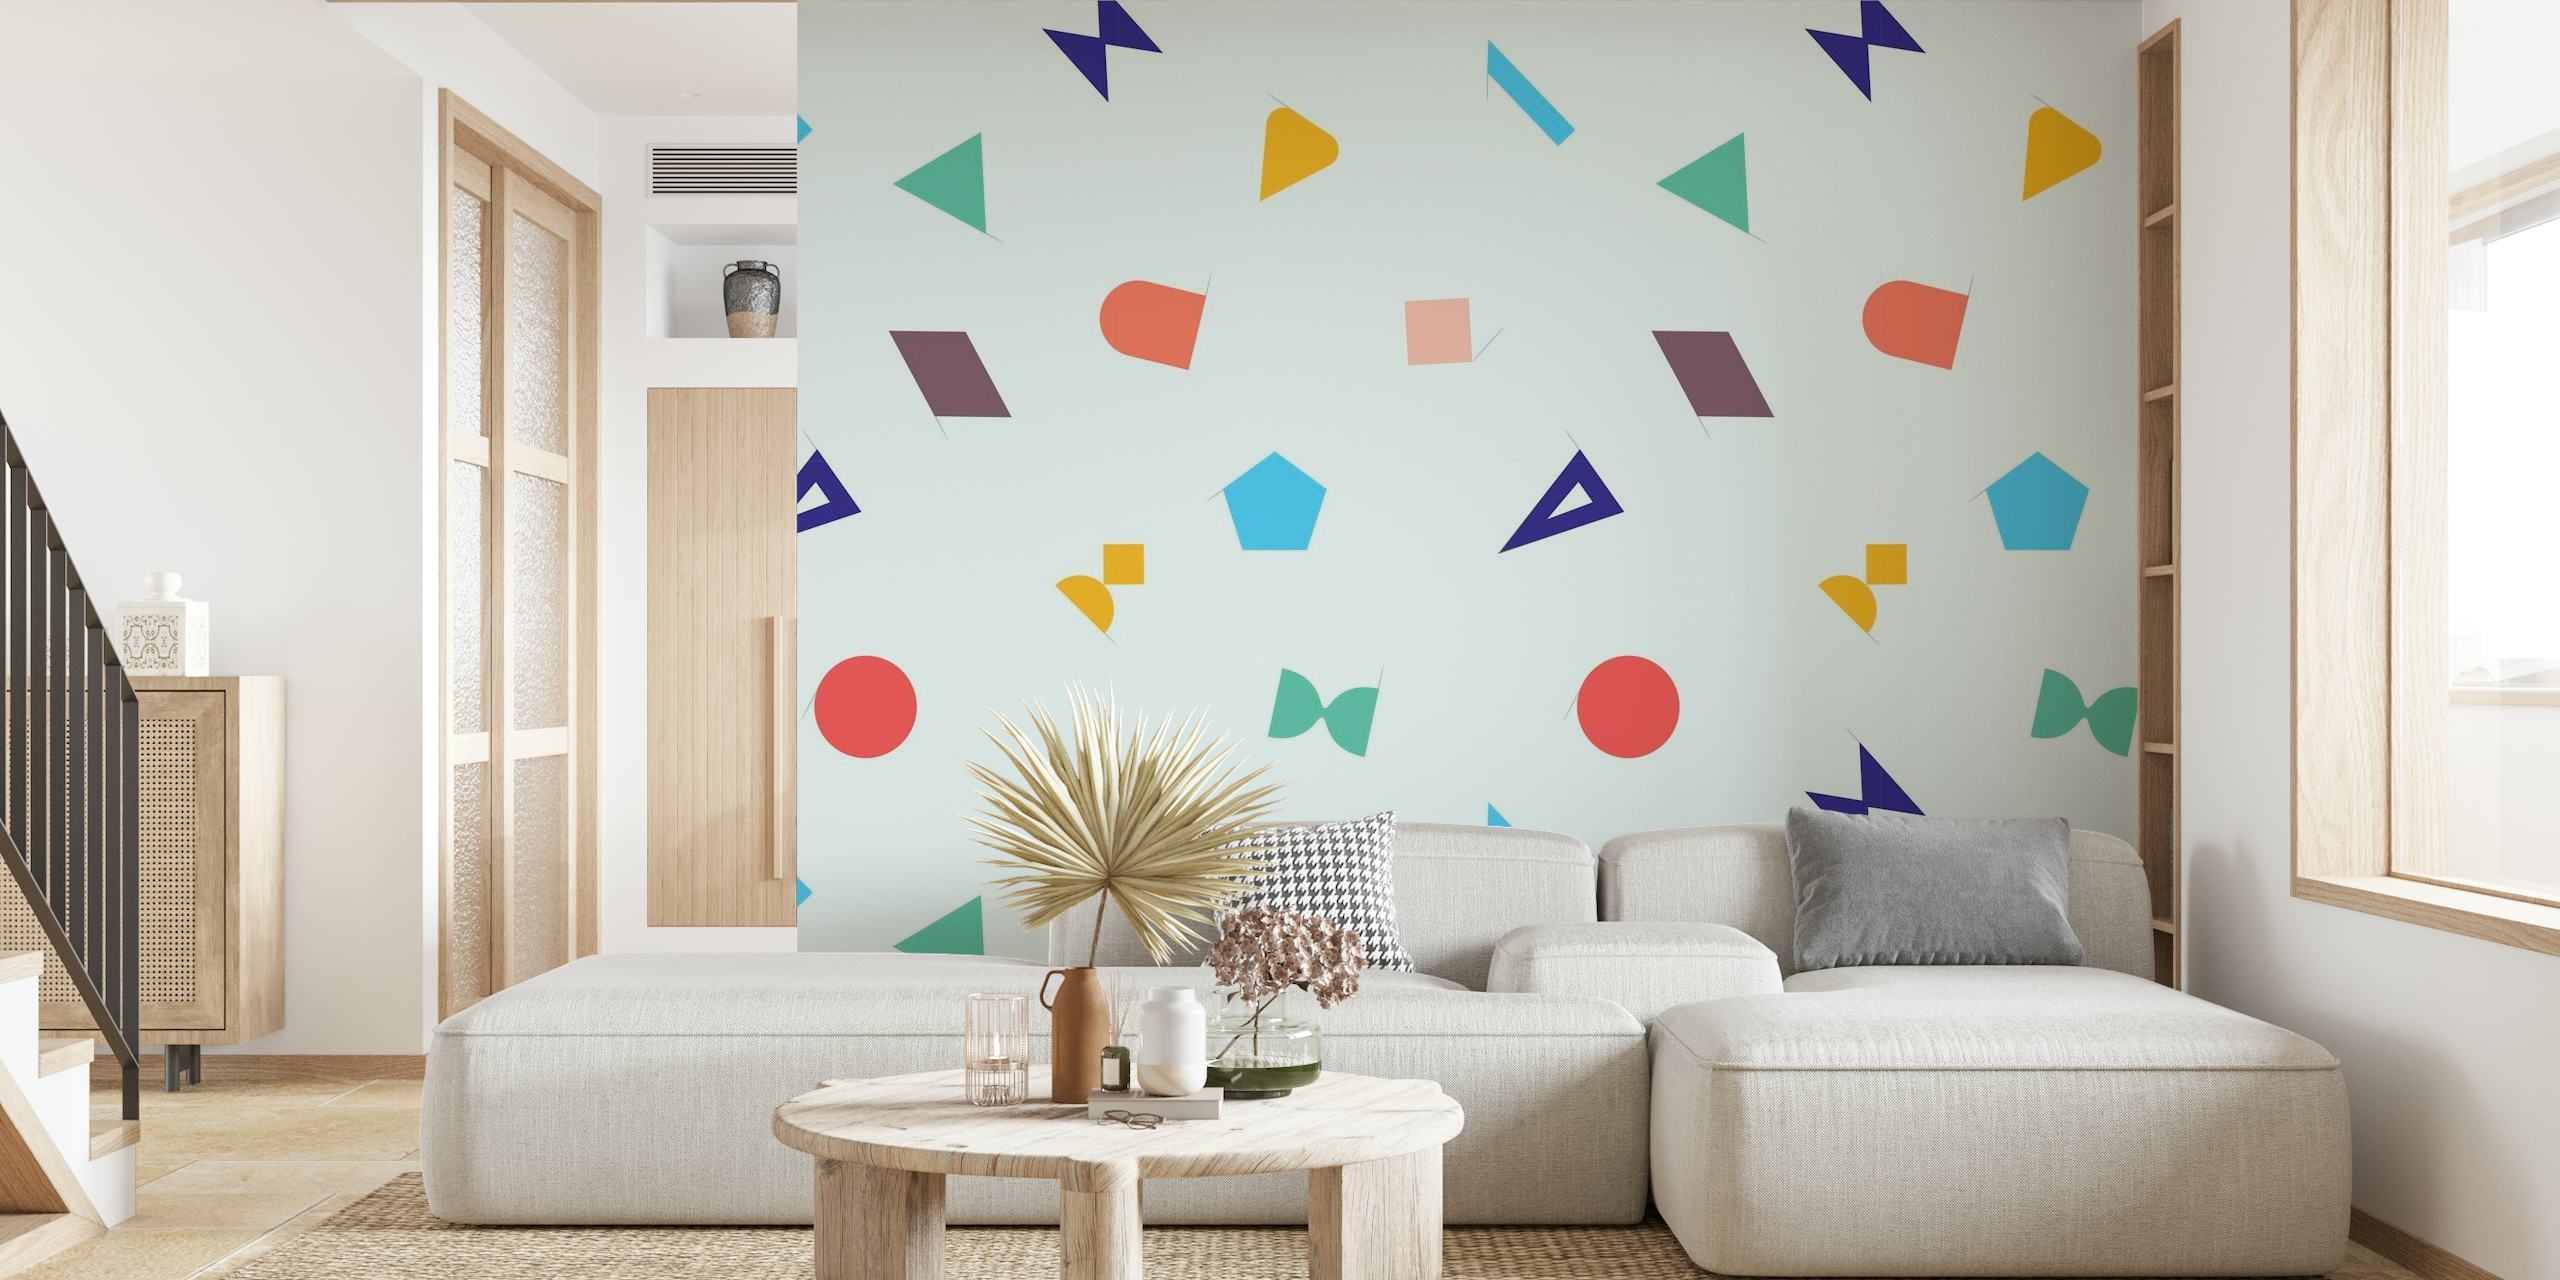 Geo II abstract geometric shapes wall mural with pastel colors